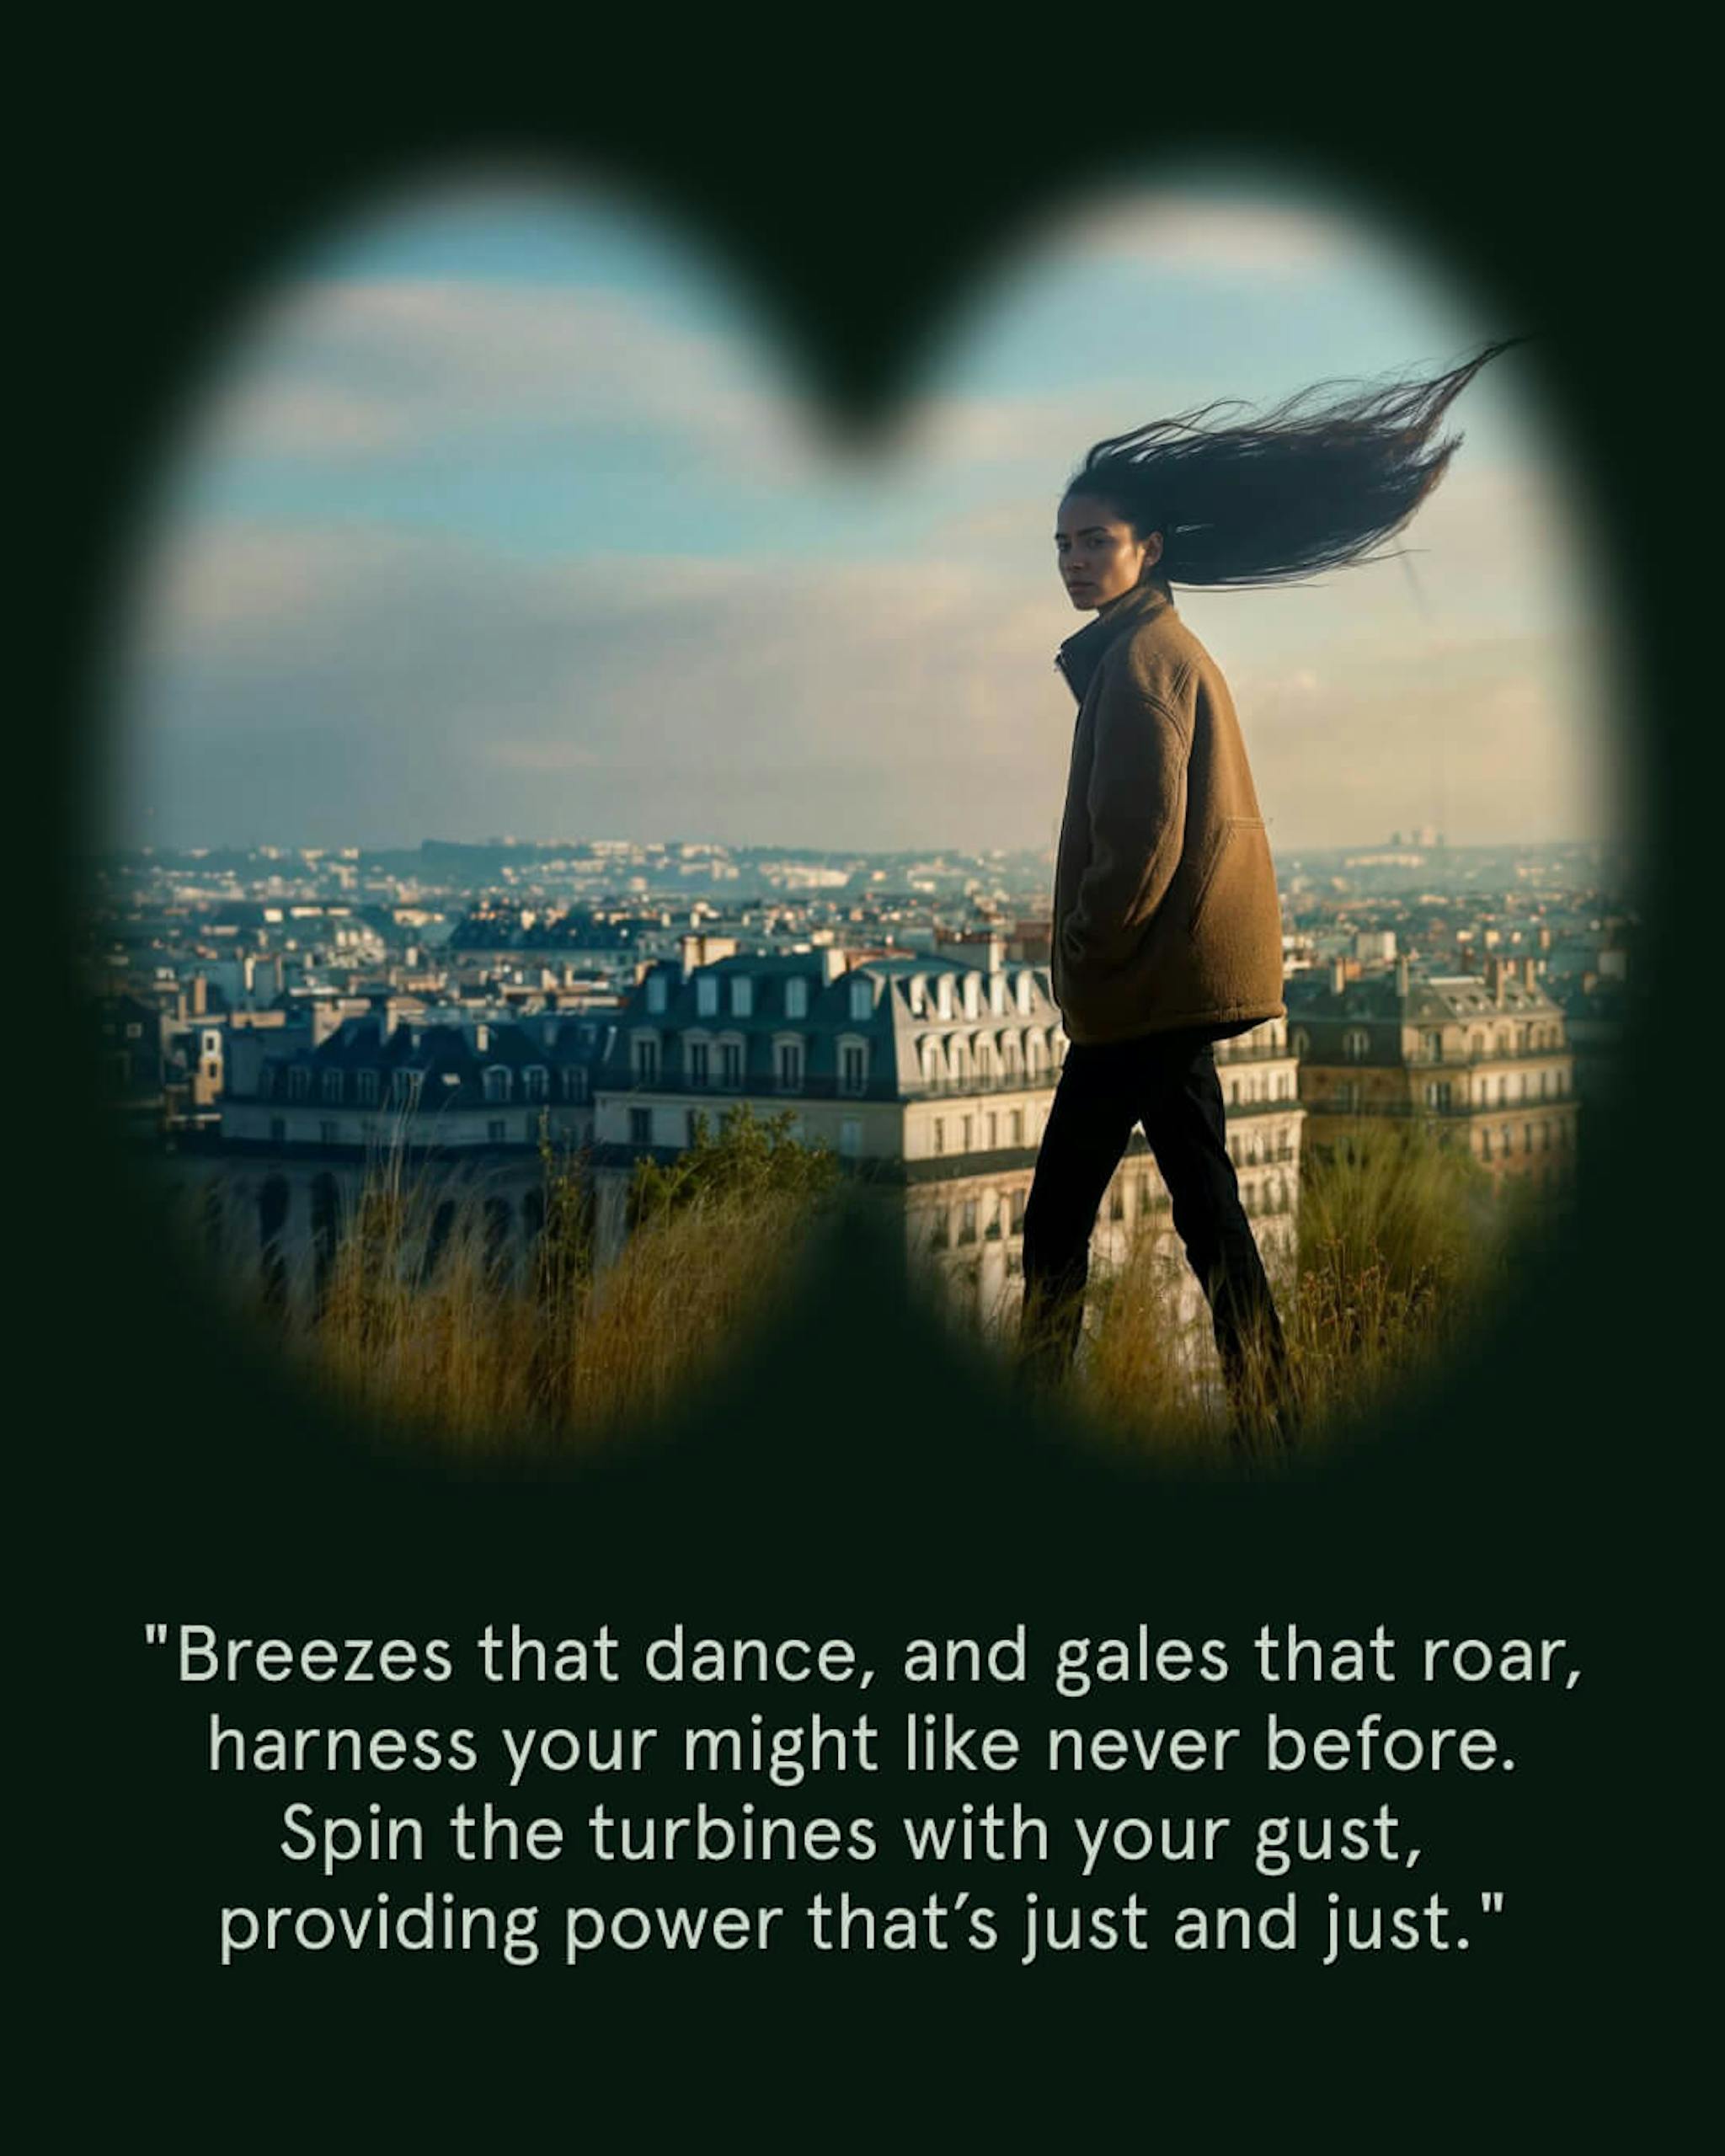 A person standing against a cityscape, their hair swept dramatically by the wind, viewed through a binocular vignette with a quote: "Breezes that dance, and gales that roar, harness your might like never before. Spin the turbines with your gust, providing power that’s just and just."